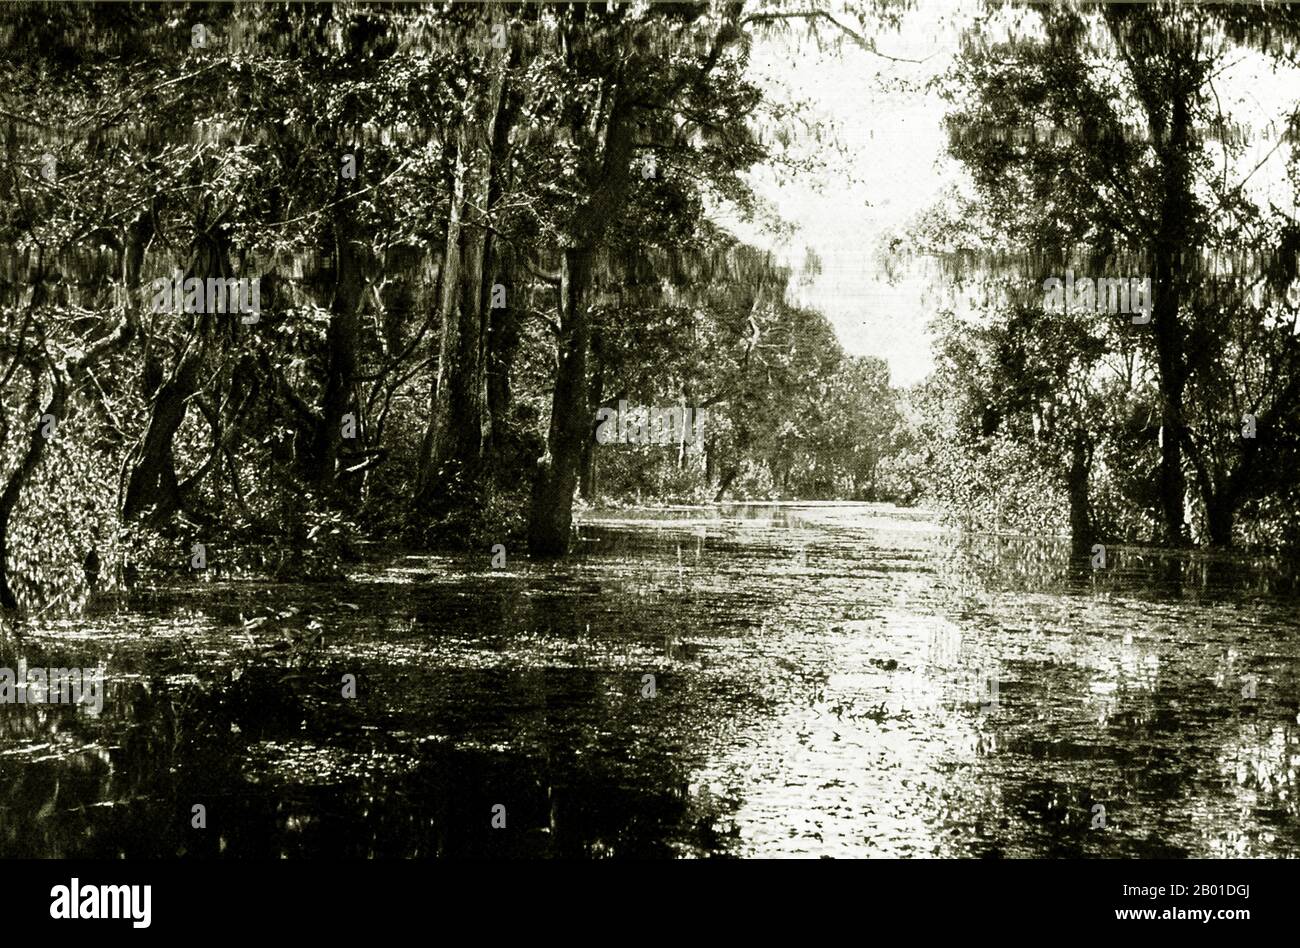 Burma: A lowland forest during monsoon season, c. 1892-1896.  The British conquest of Burma began in 1824 in response to a Burmese attempt to invade India. By 1886, and after two further wars, Britain had incorporated the entire country into the British Raj. To stimulate trade and facilitate changes, the British brought in Indians and Chinese, who quickly displaced the Burmese in urban areas. To this day Rangoon and Mandalay have large ethnic Indian populations. Railways and schools were built, as well as a large number of prisons, including the infamous Insein Prison. Stock Photo